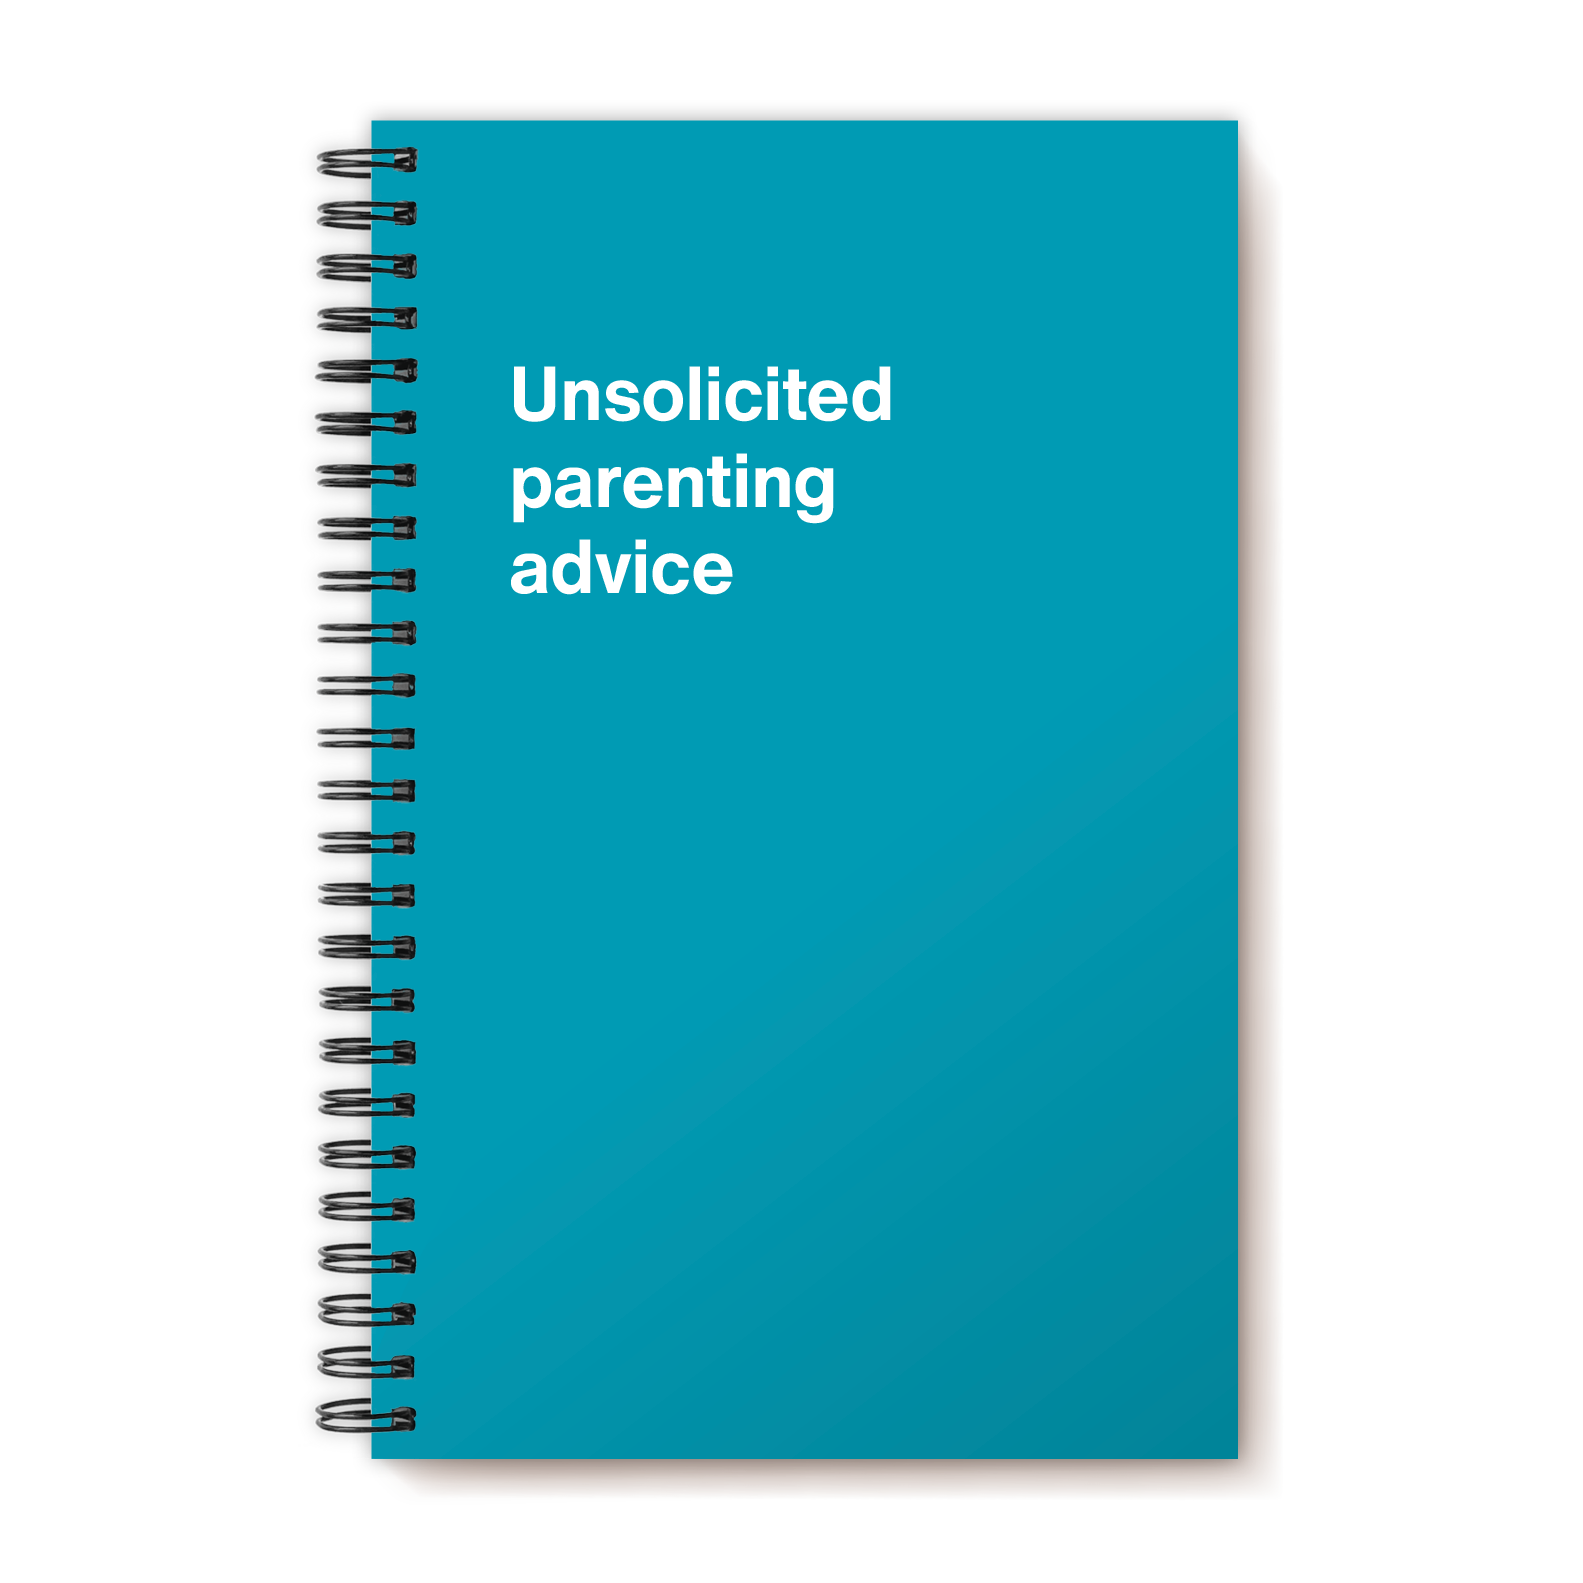 Unsolicited parenting advice | WTF Notebooks